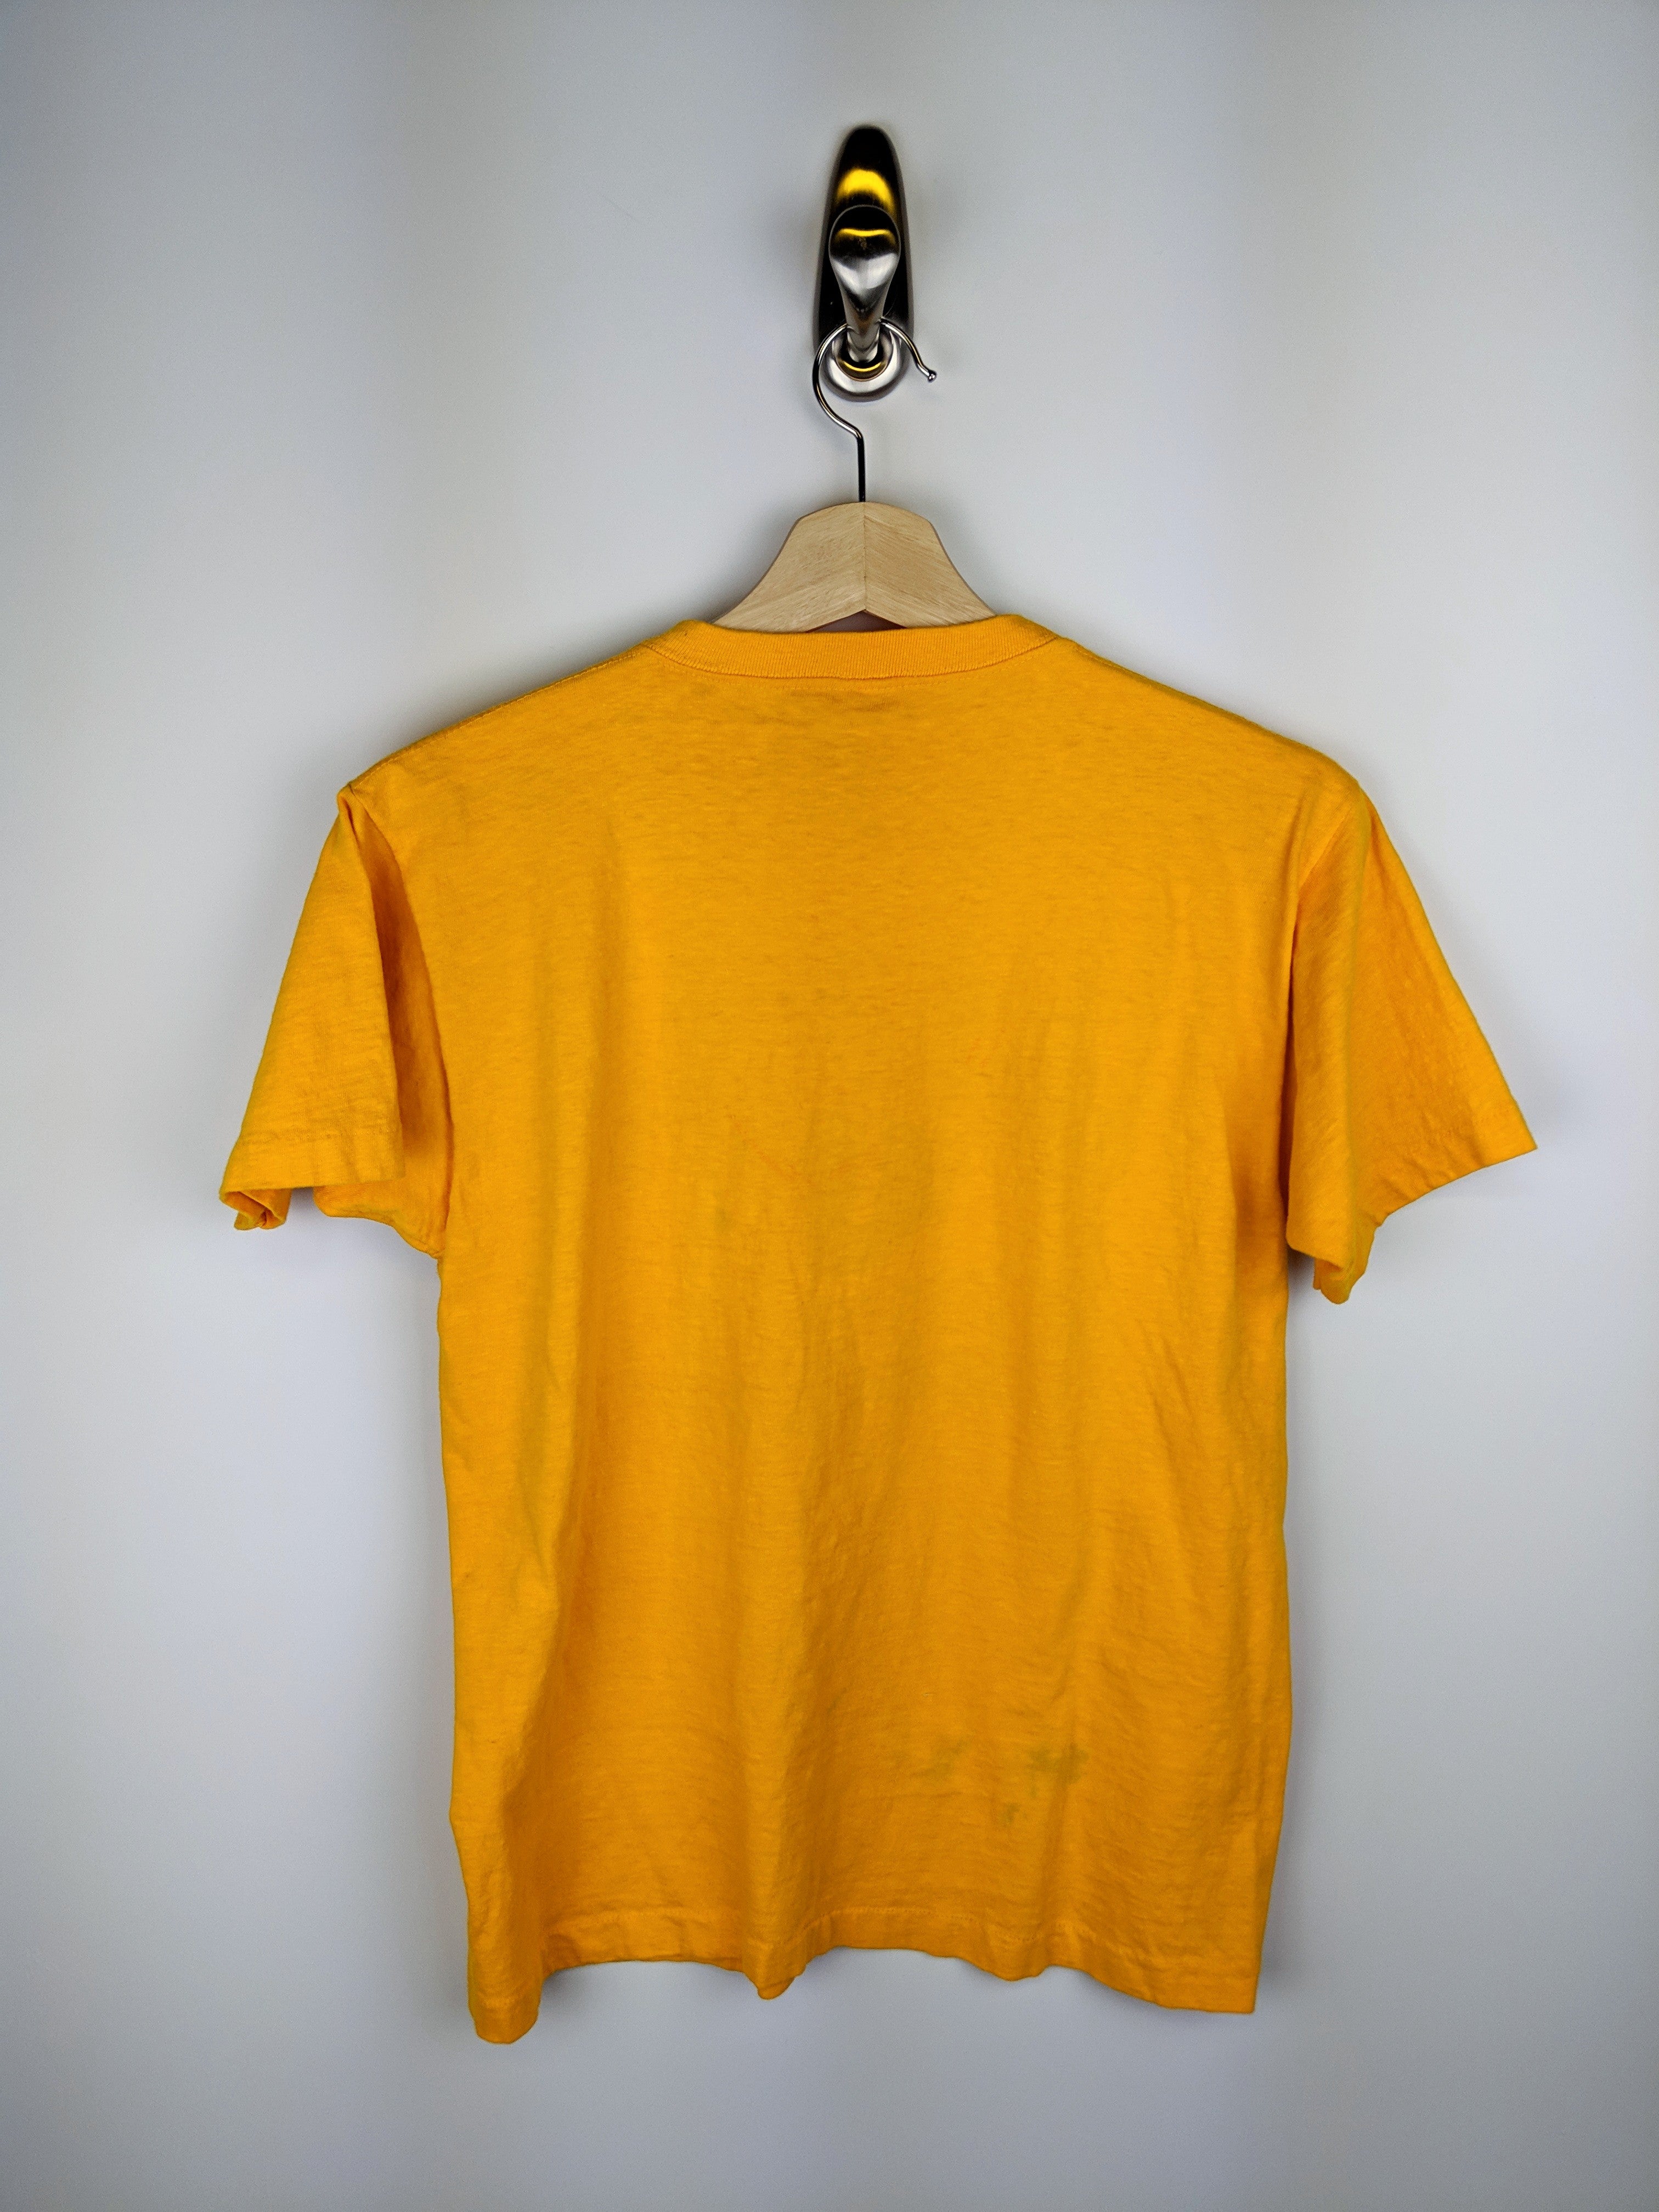 Vintage Chargers Single Stitch Tee (S)